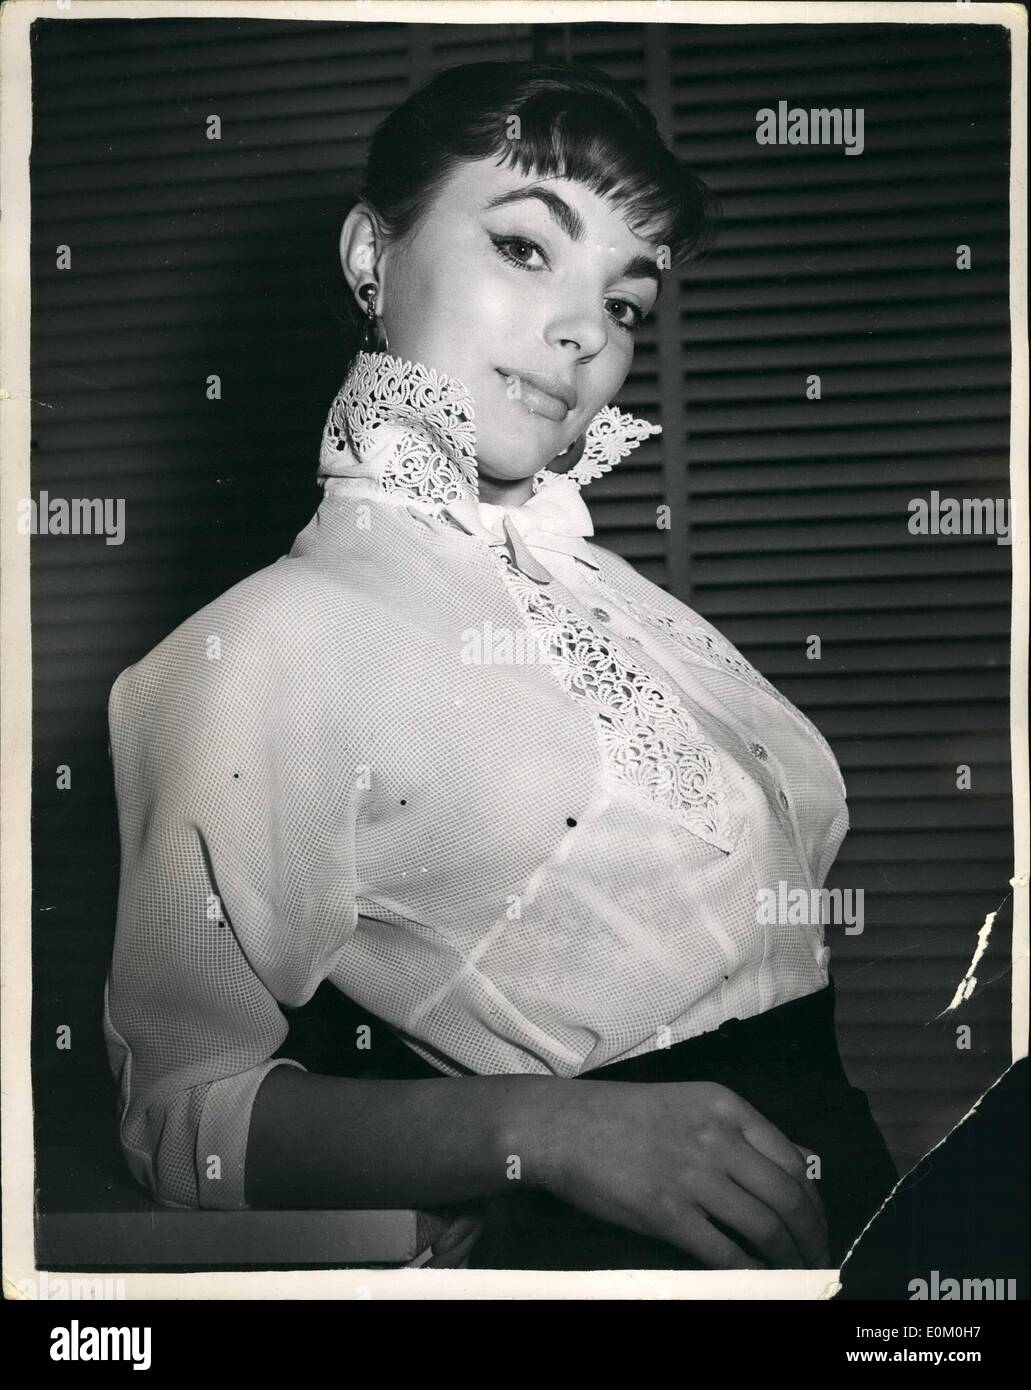 Jan. 01, 1953 - London show of spring Blouses. starlet Joan Collins, took time off the set of ''Turn the key sorority'', to model this Sybille et cie summer creation in check Georgette and epicure lace - from the Sybille at cie spring collection of blouses in Mayfair today. Feature of the blouses is an attractive stand - up collar. Stock Photo